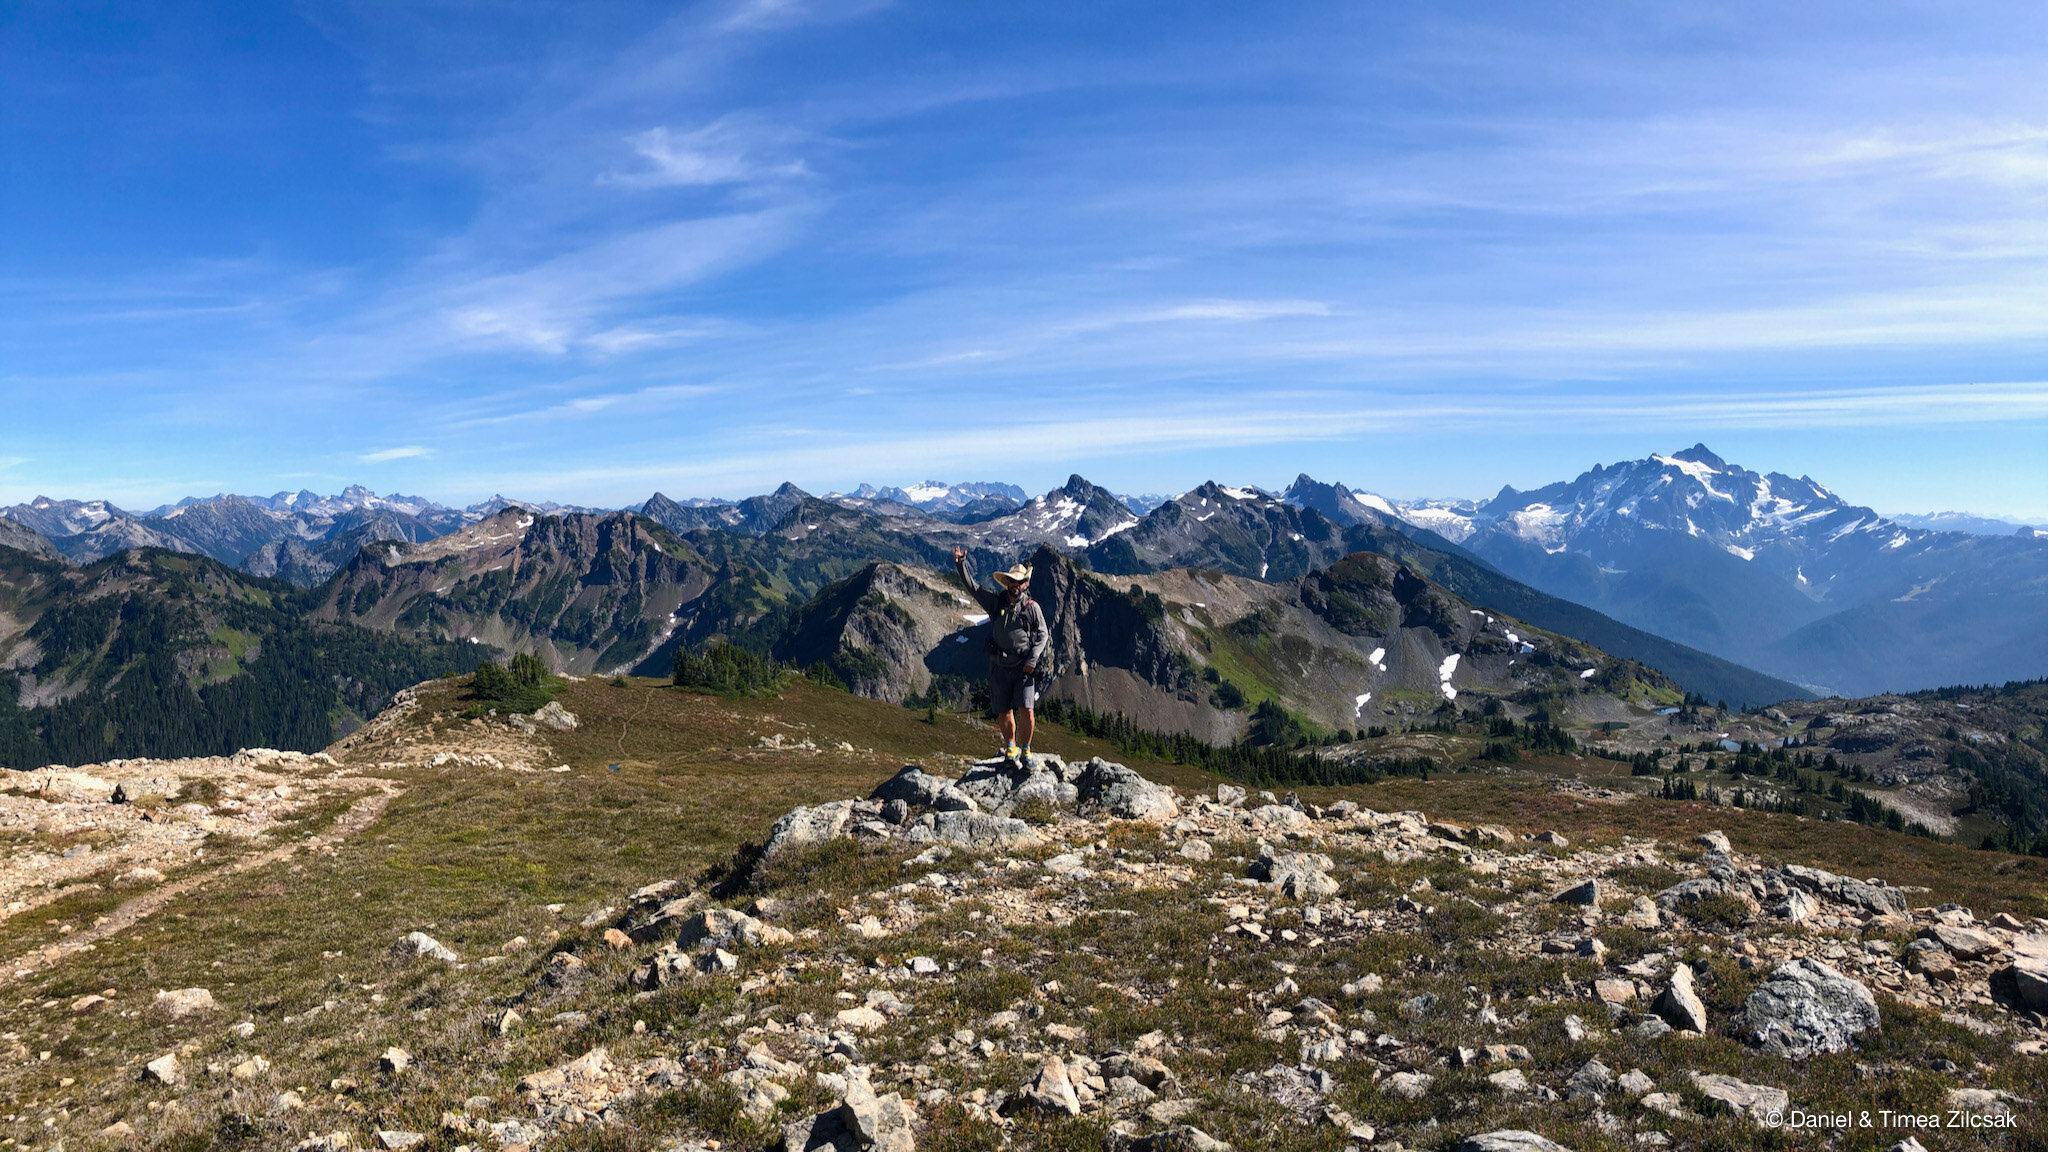 View of Mt Shuksan and other peaks of the North Cascades